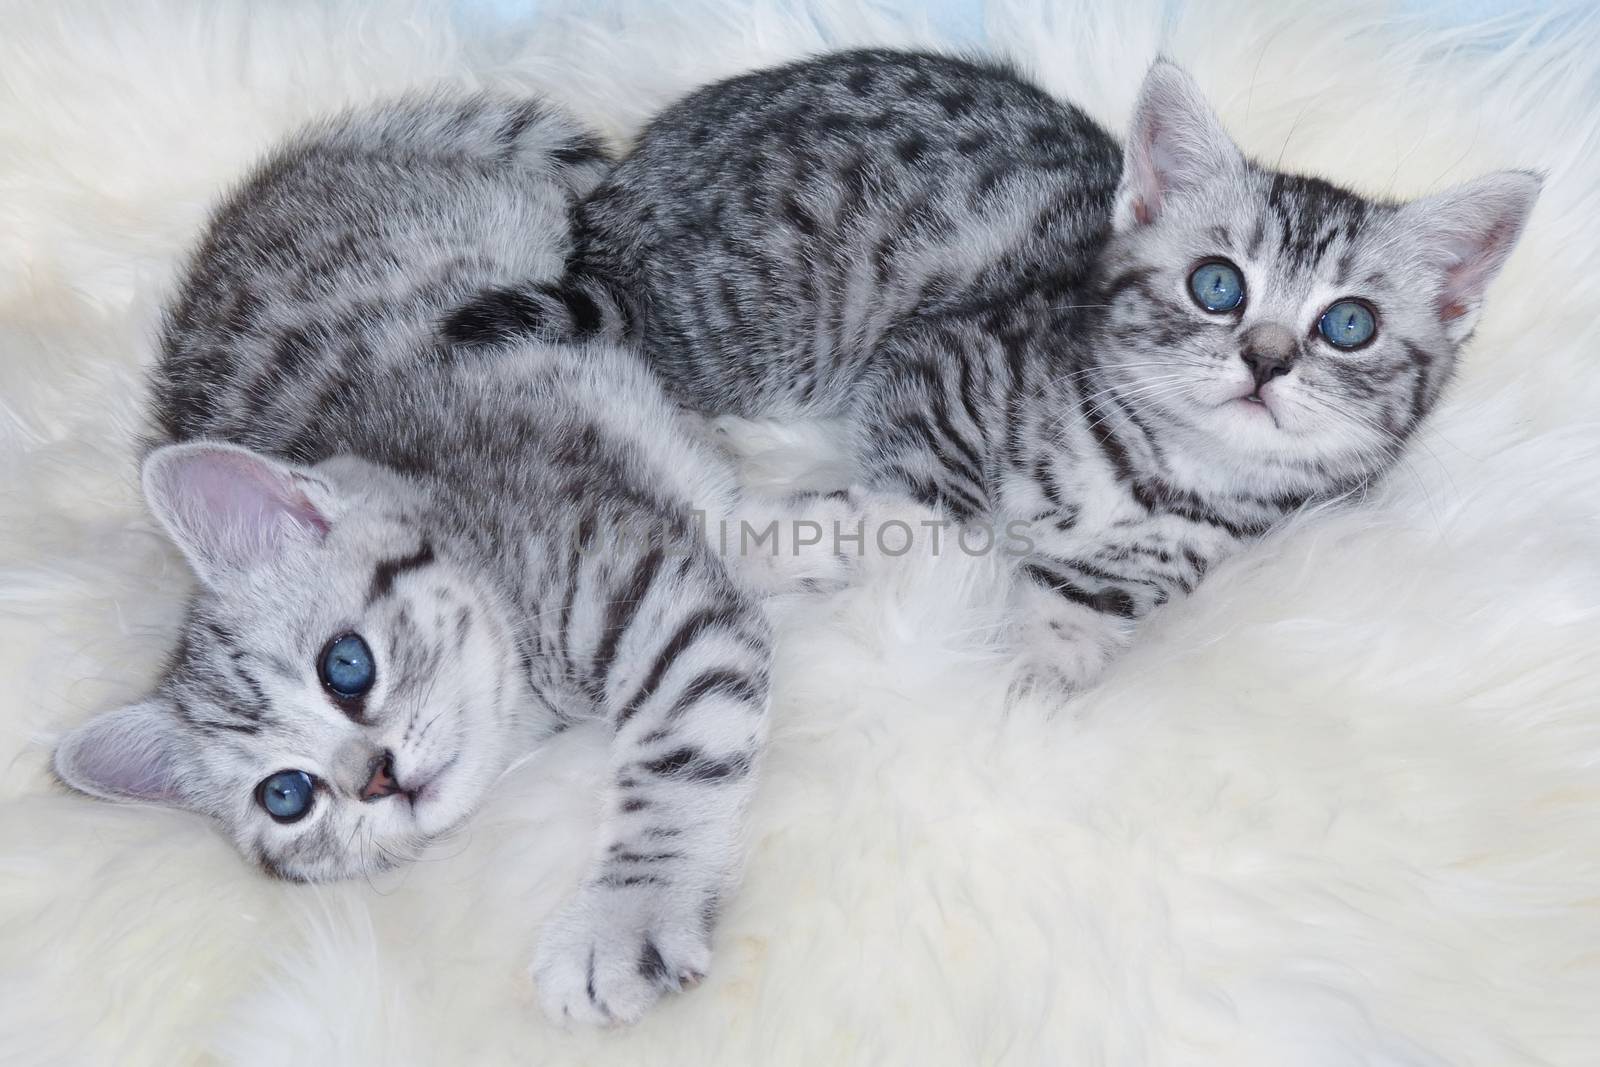 Two young black silver tabby cats lying lazy together on sheepskin